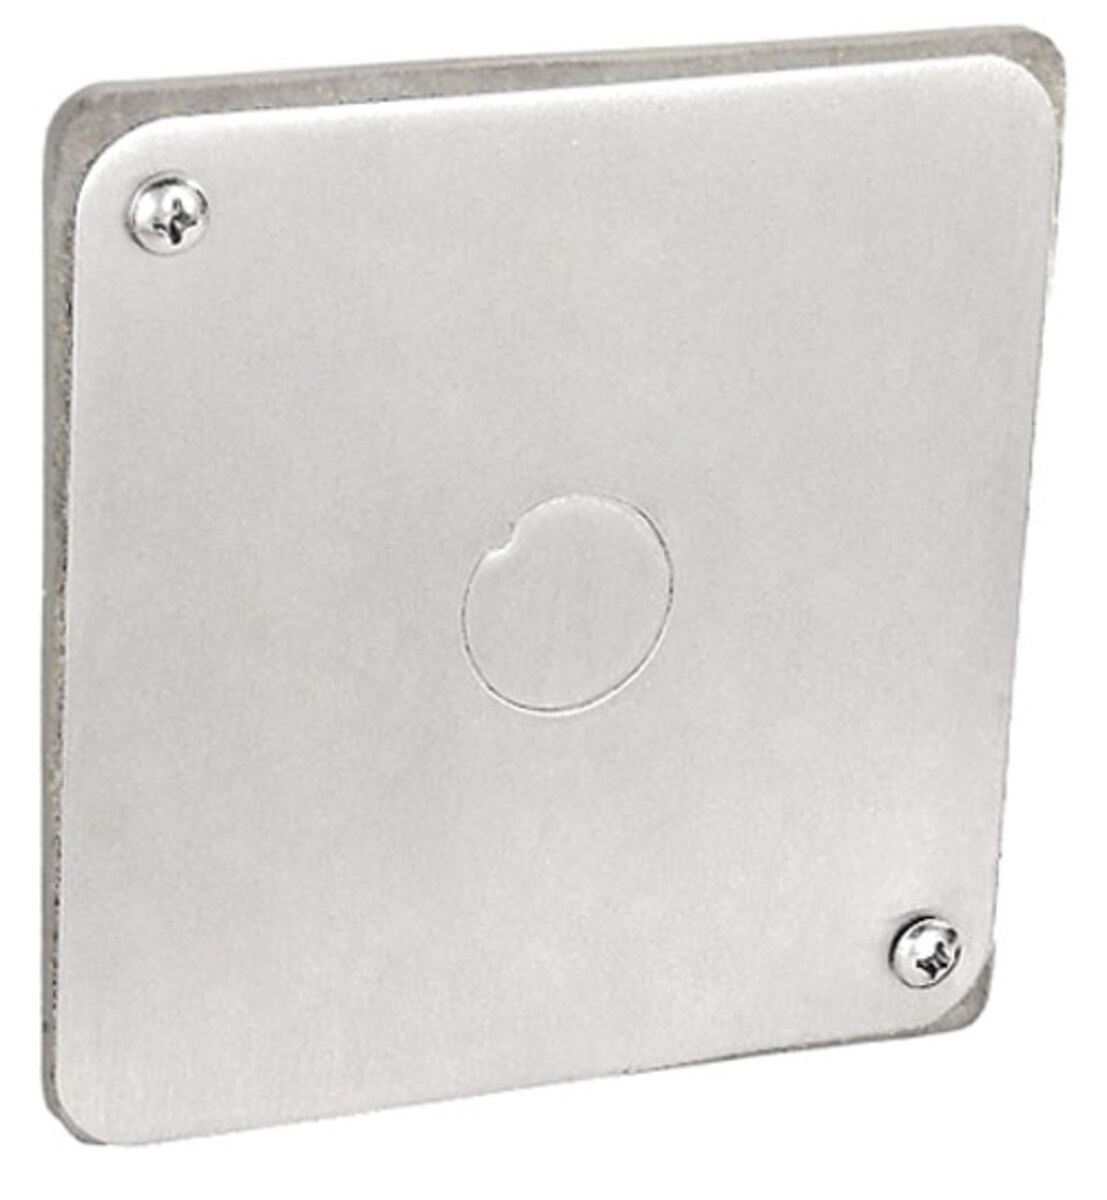 4" Square Plenum Blank Cover - W/ 1/2" Knockout - Stainless Steel